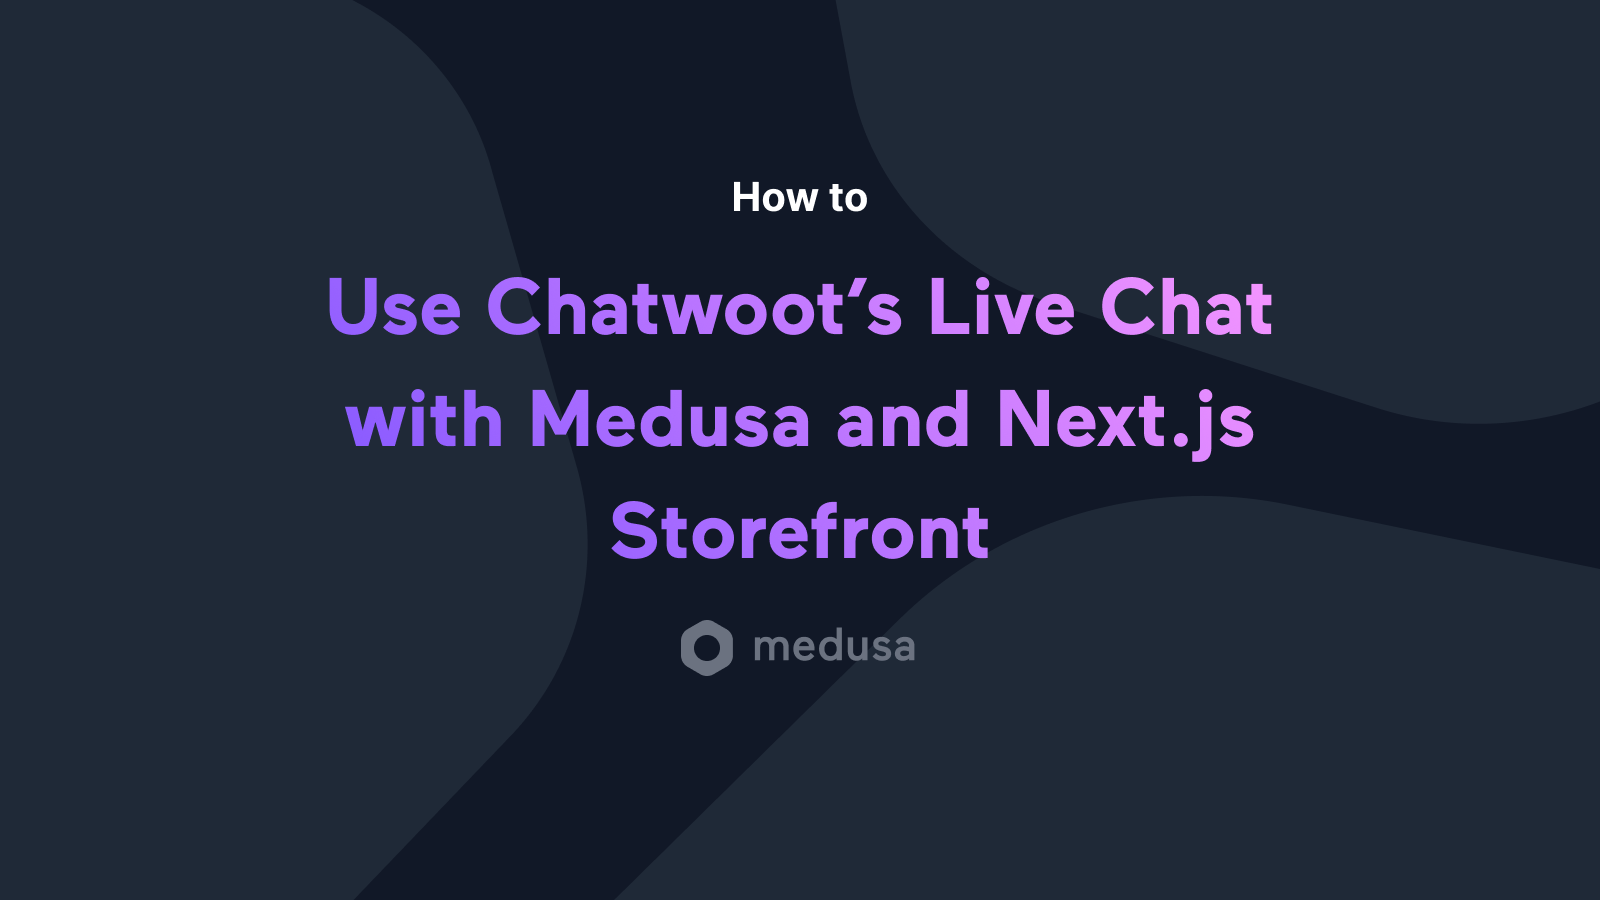 How to Use Chatwoot’s Live Chat with Medusa and Next.js Storefront